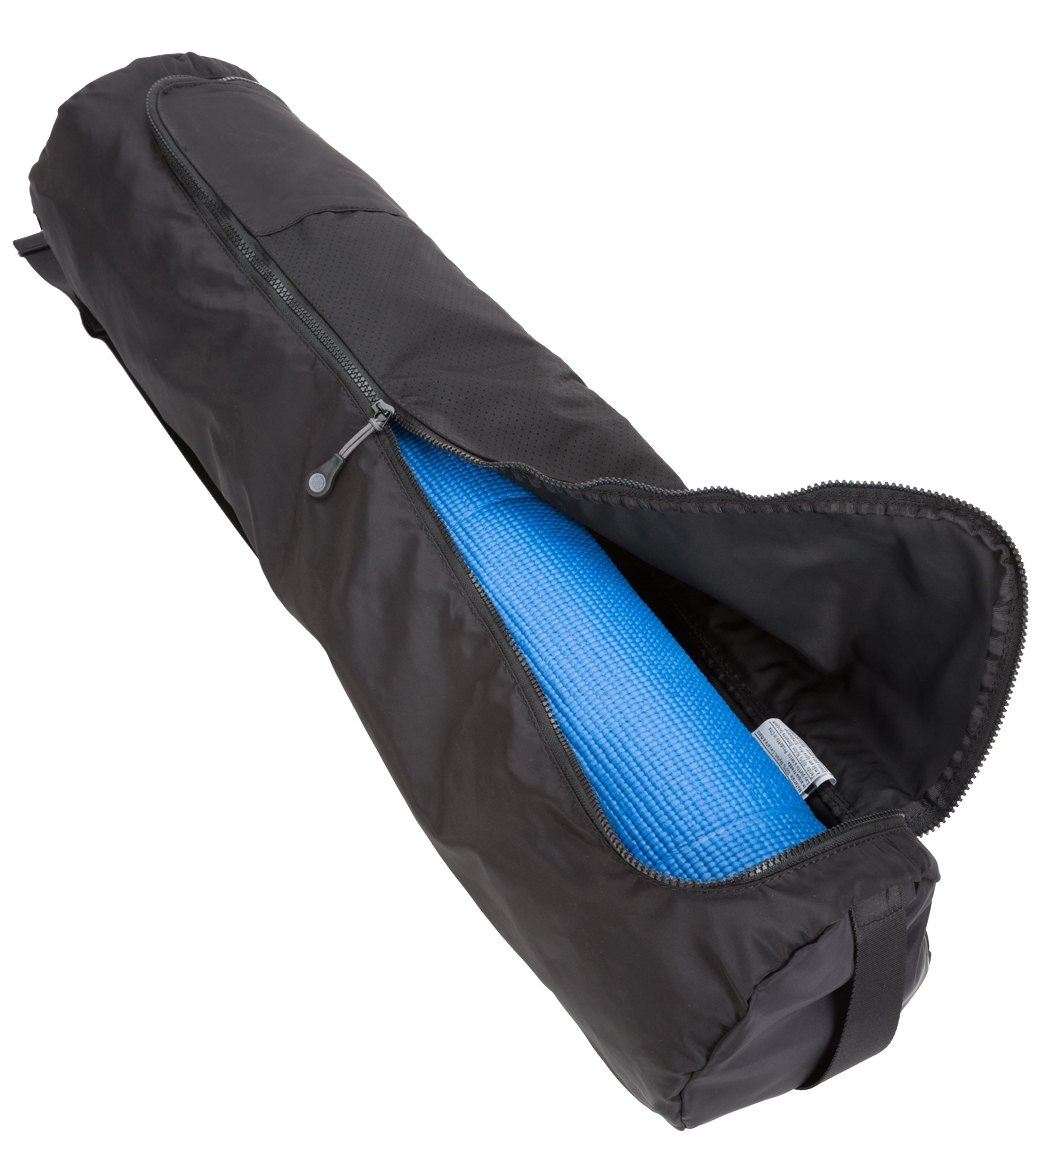 Manduka Go Play Yoga Mat Carrier with Pocket, Adjustable Strap, Suitable  for All Yoga Mats